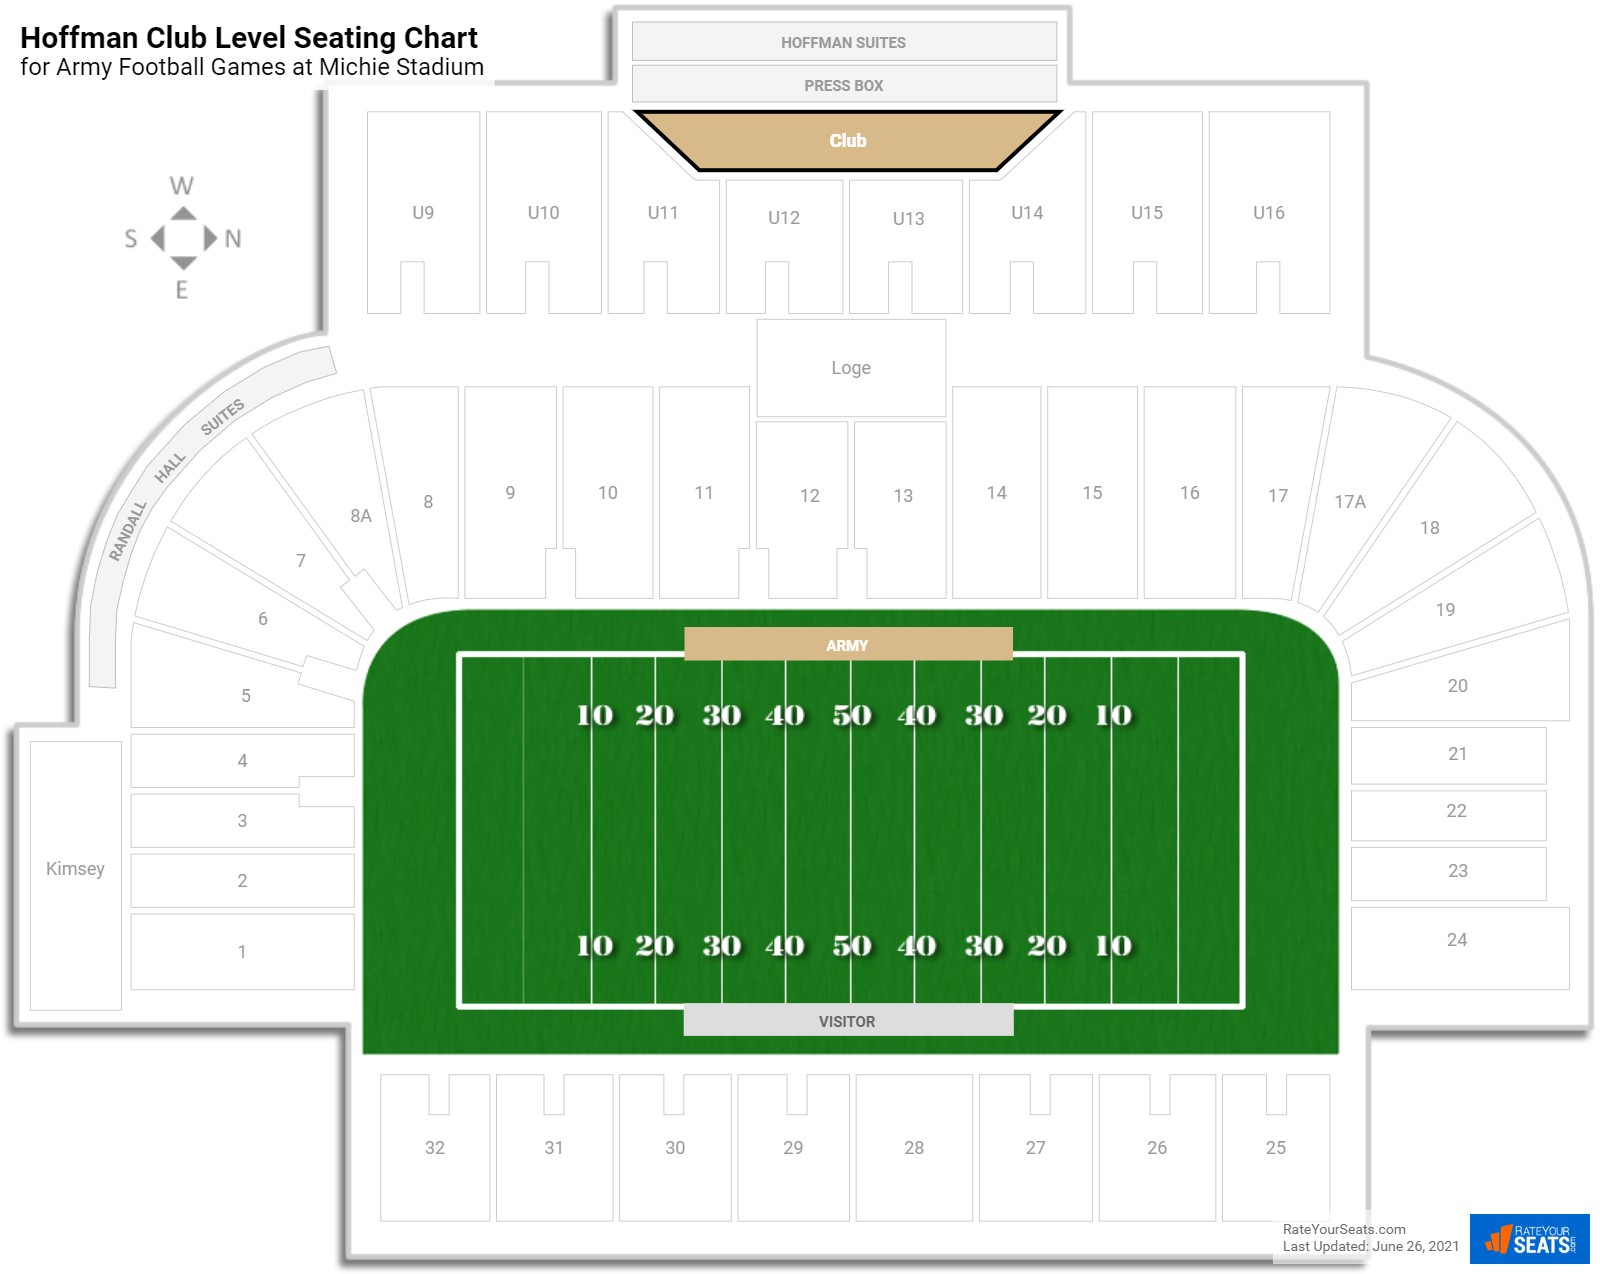 Army Hoffman Club Level Seating Chart at Michie Stadium